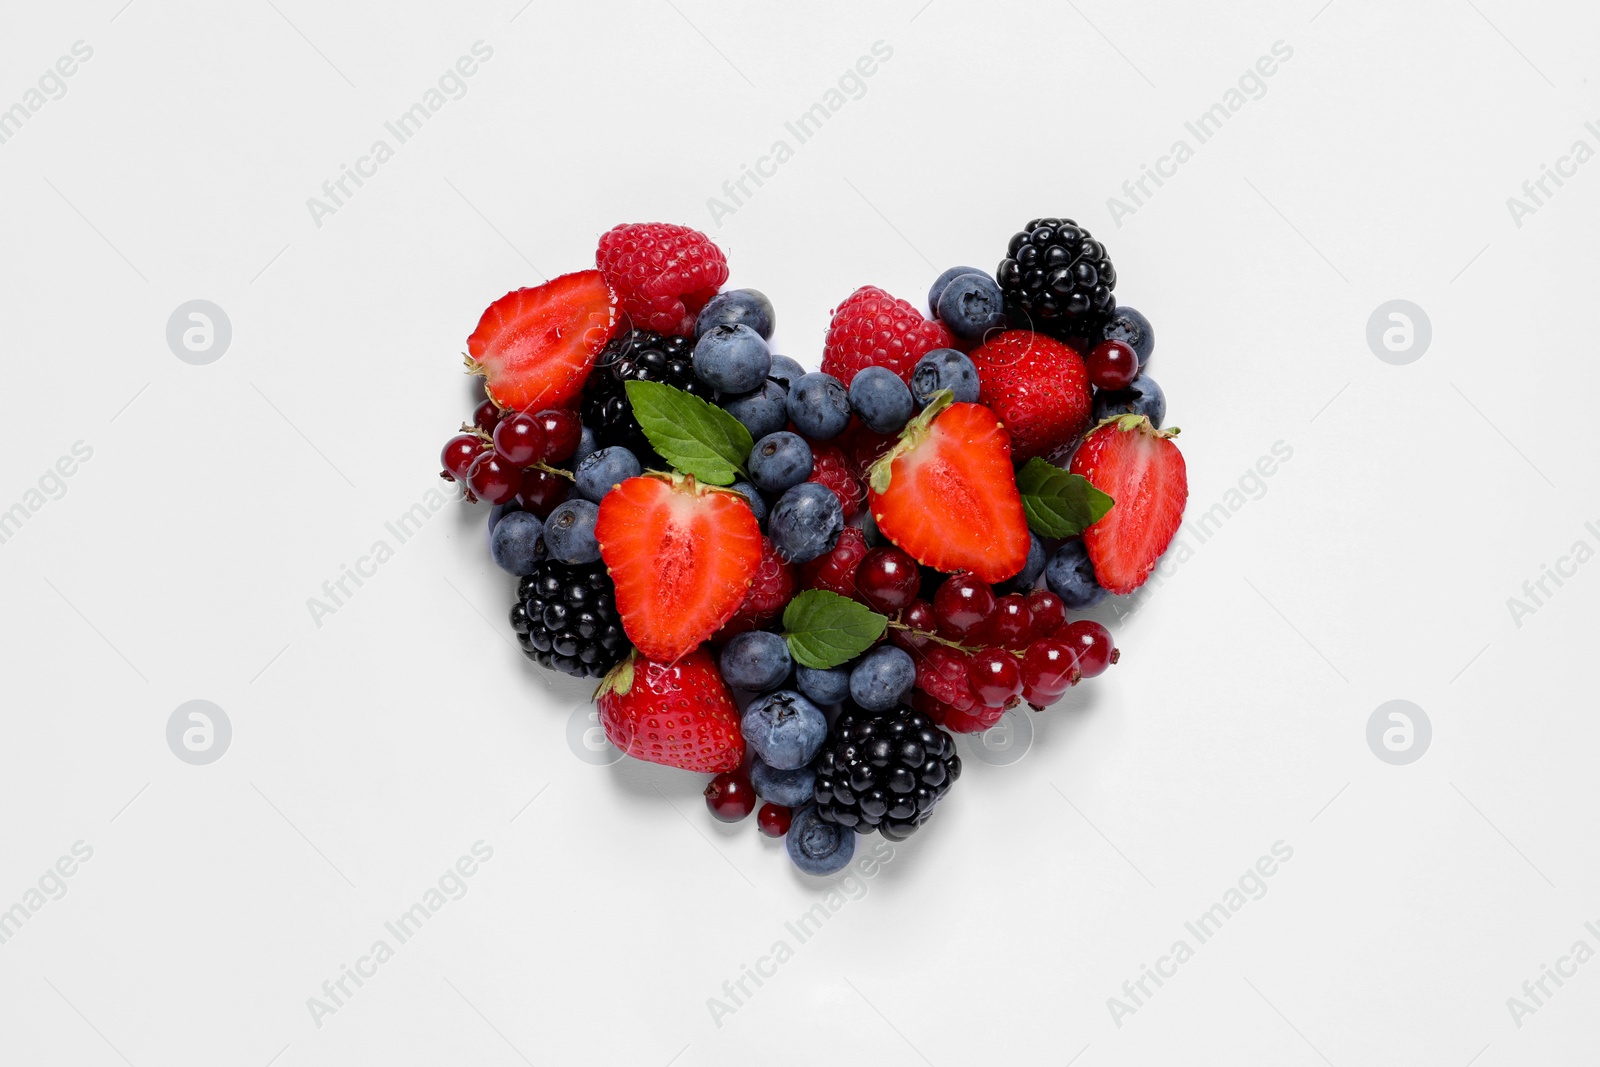 Photo of Heart made of different fresh ripe berries on white table, top view